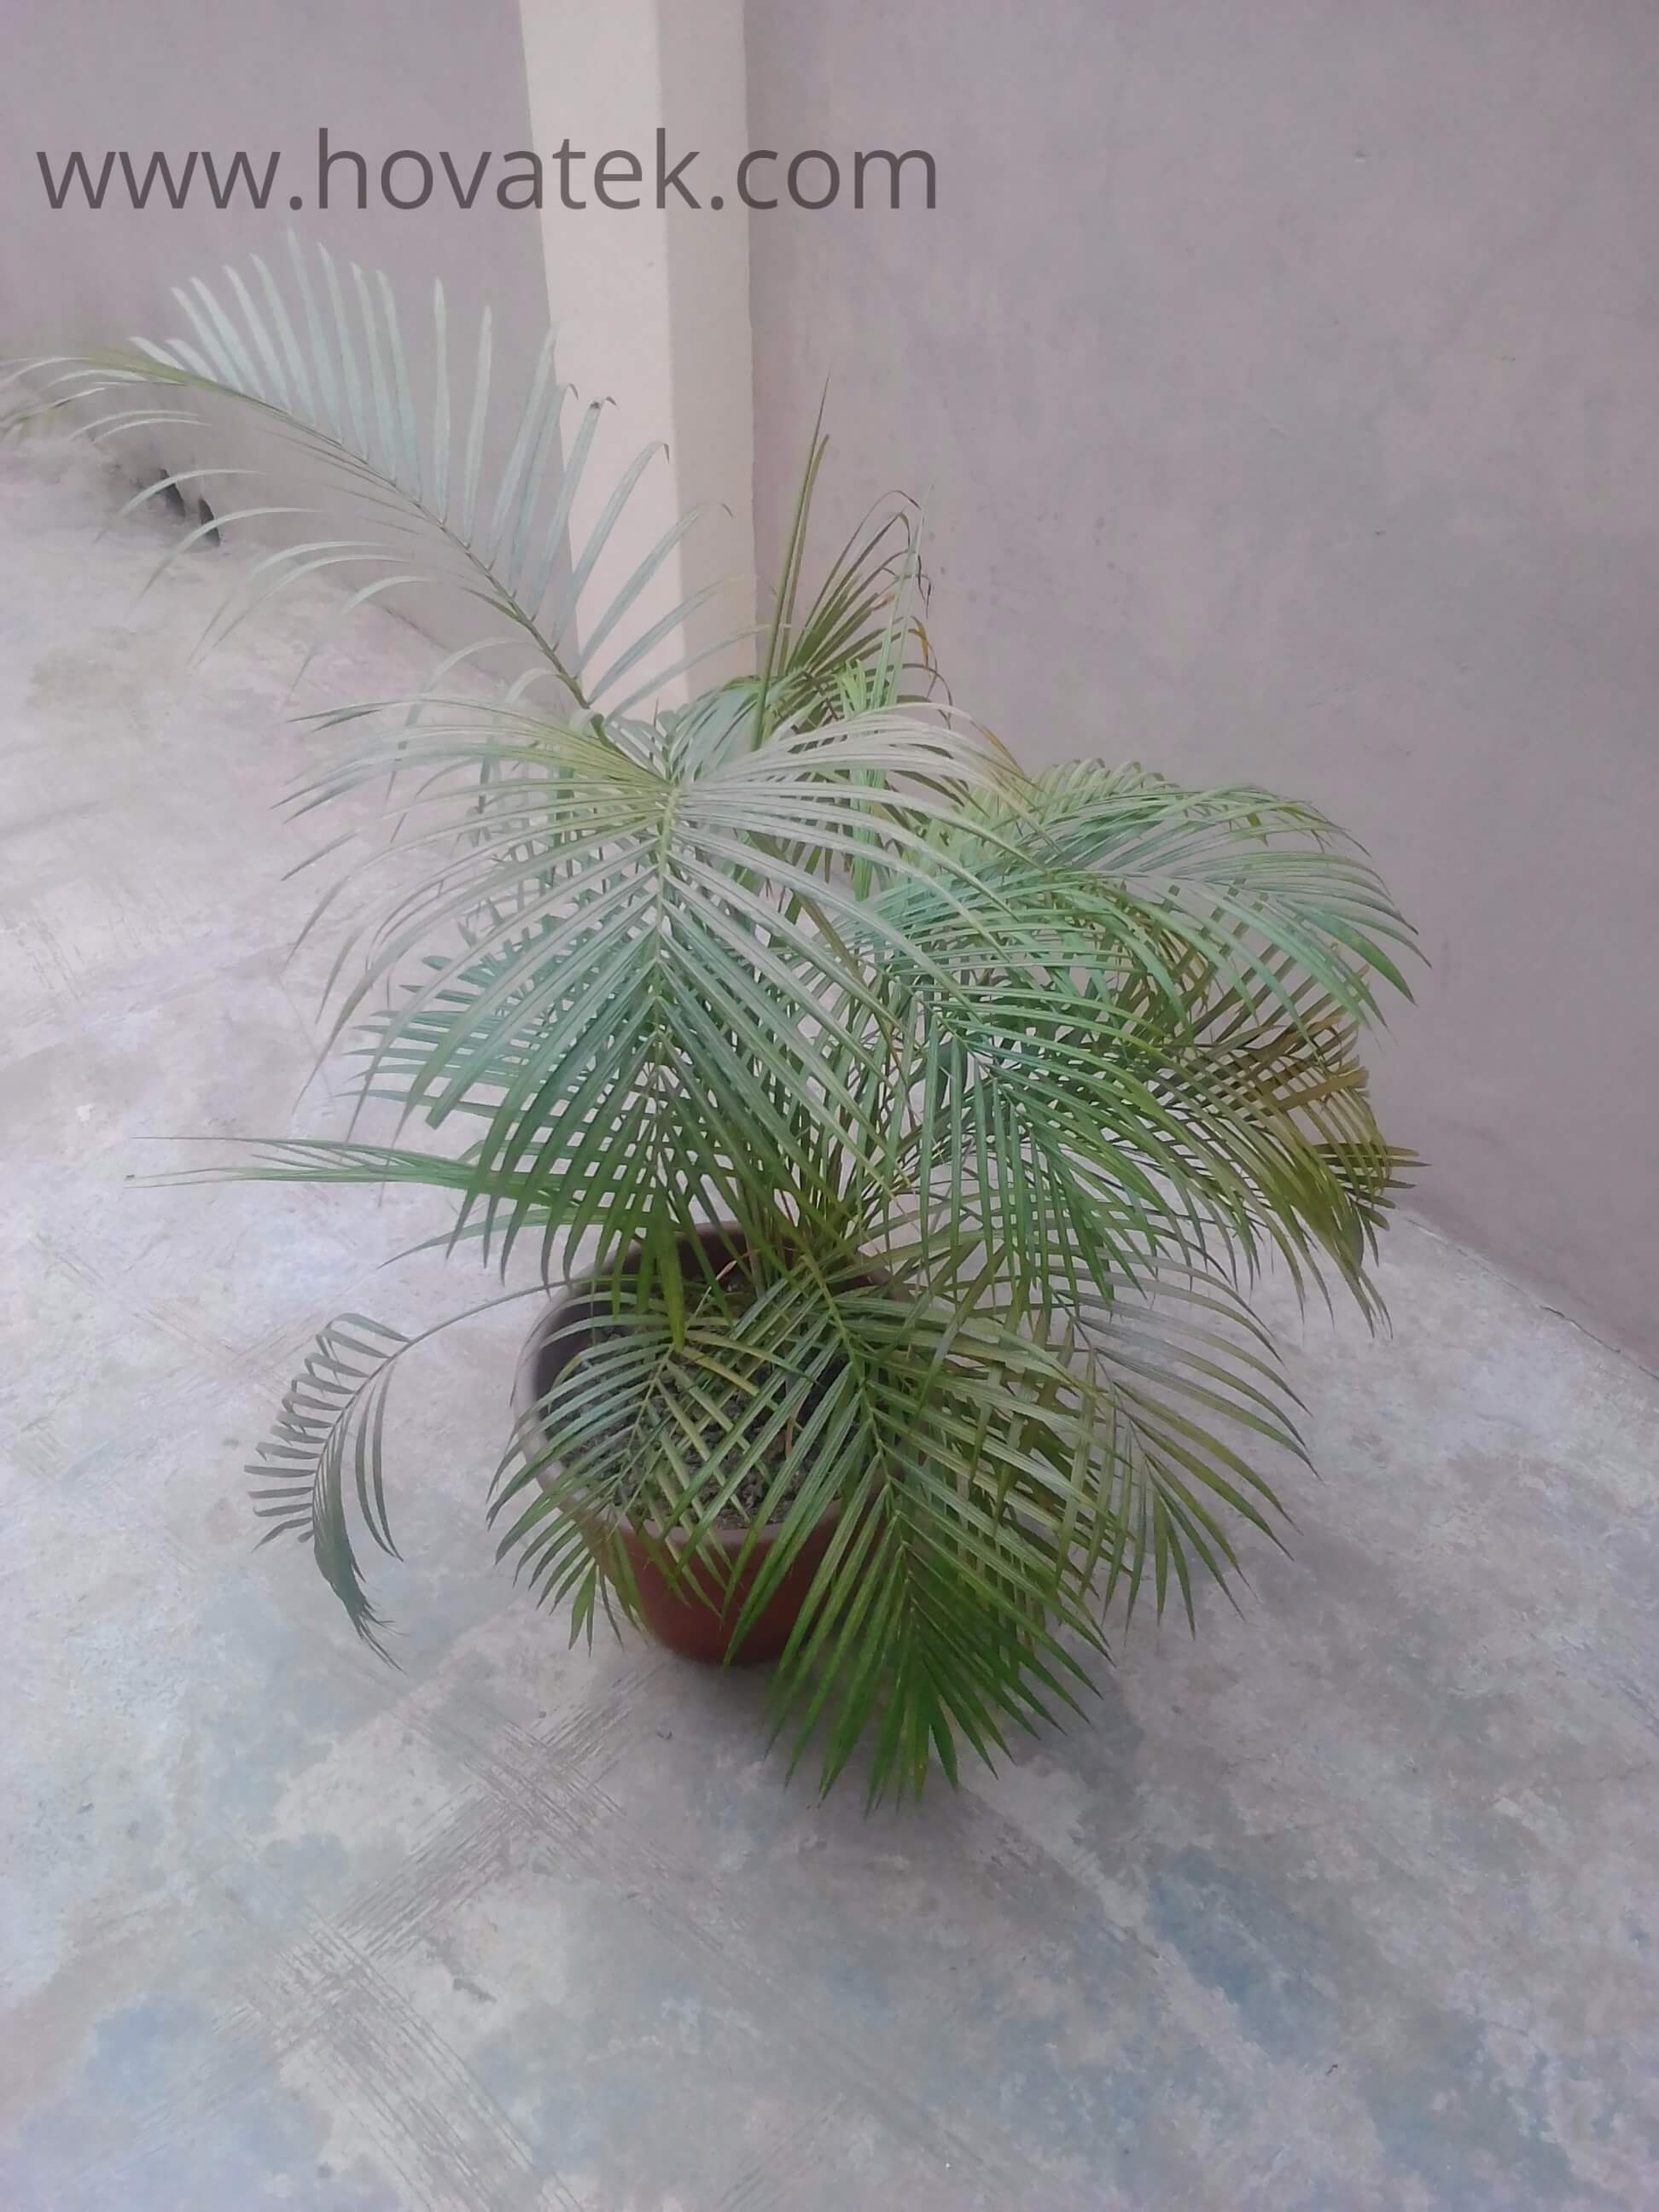 Itel IT1513 outdoor camera review, picture of a Palm Plant